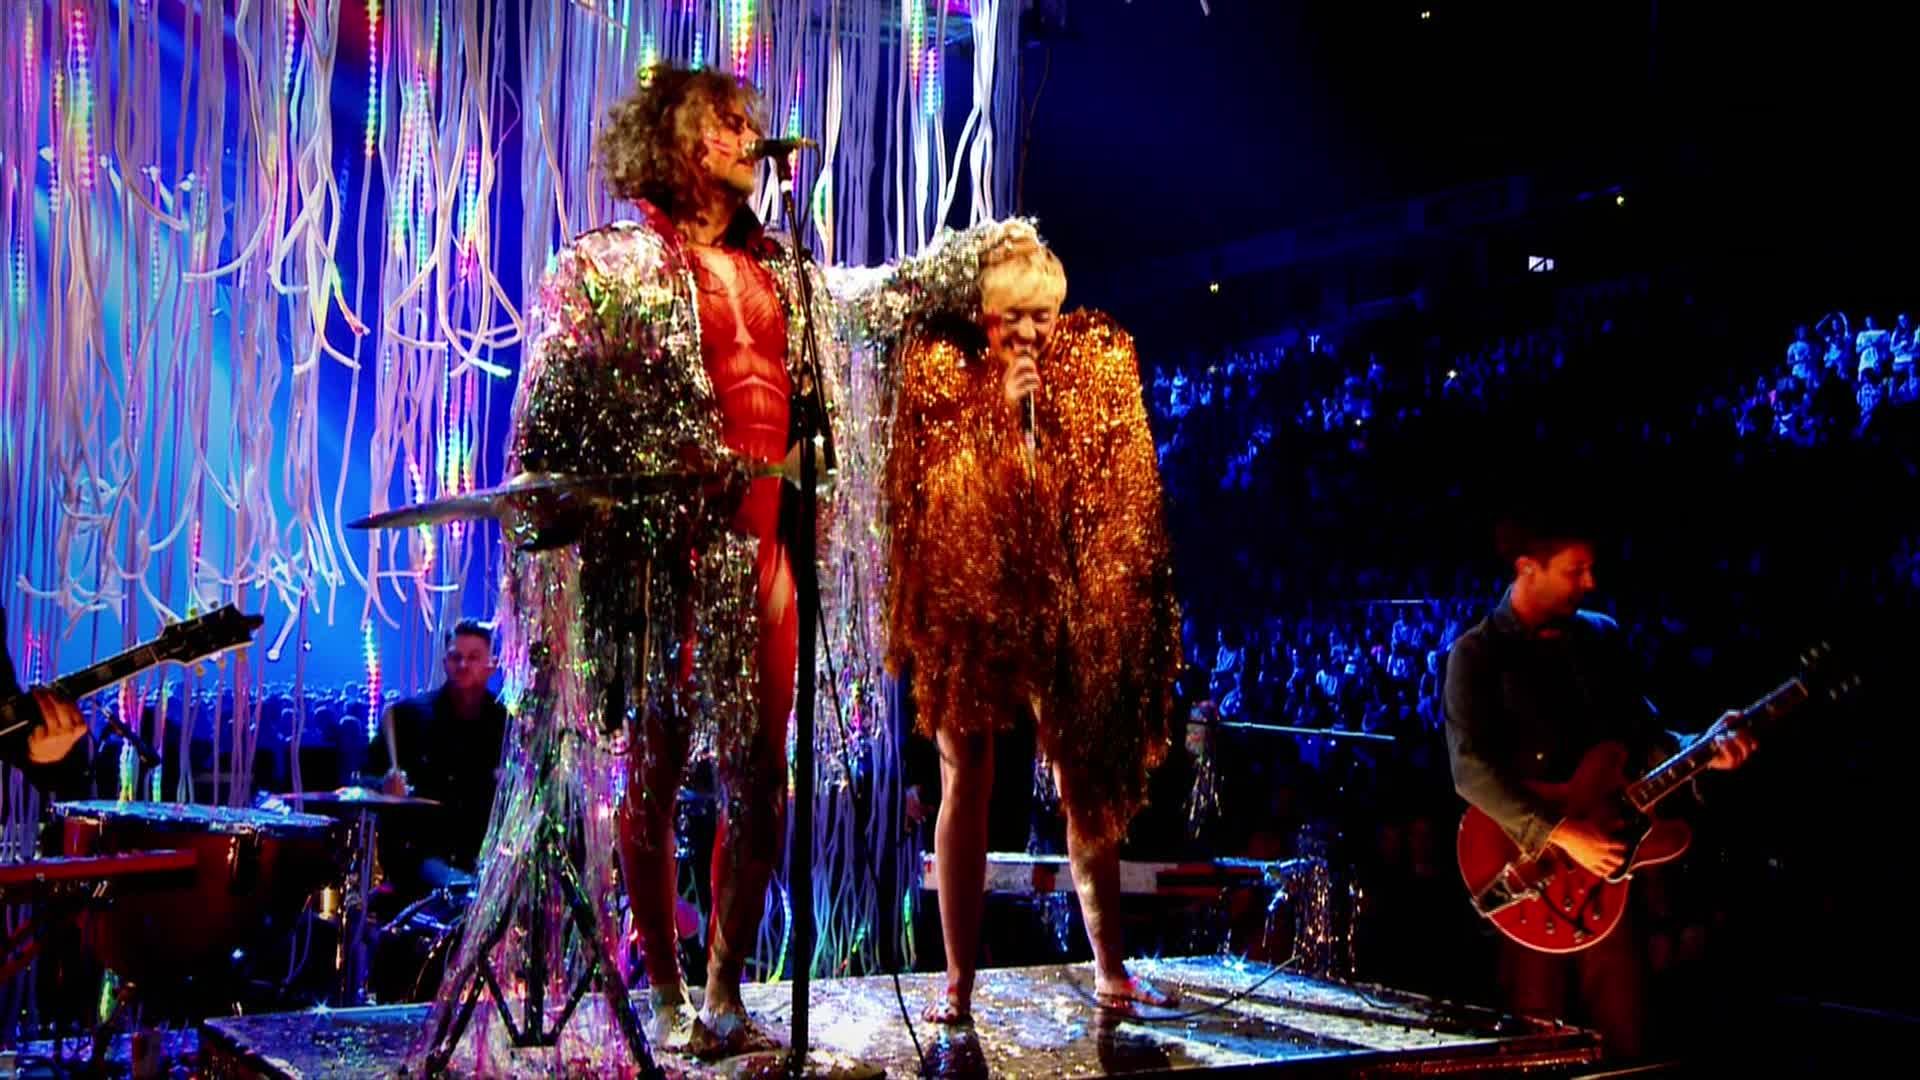 Miley Cyrus [ft The Flaming Lips] - 2014-05-18, Billboard Music Awards - 1080 TS - LSD preview 13